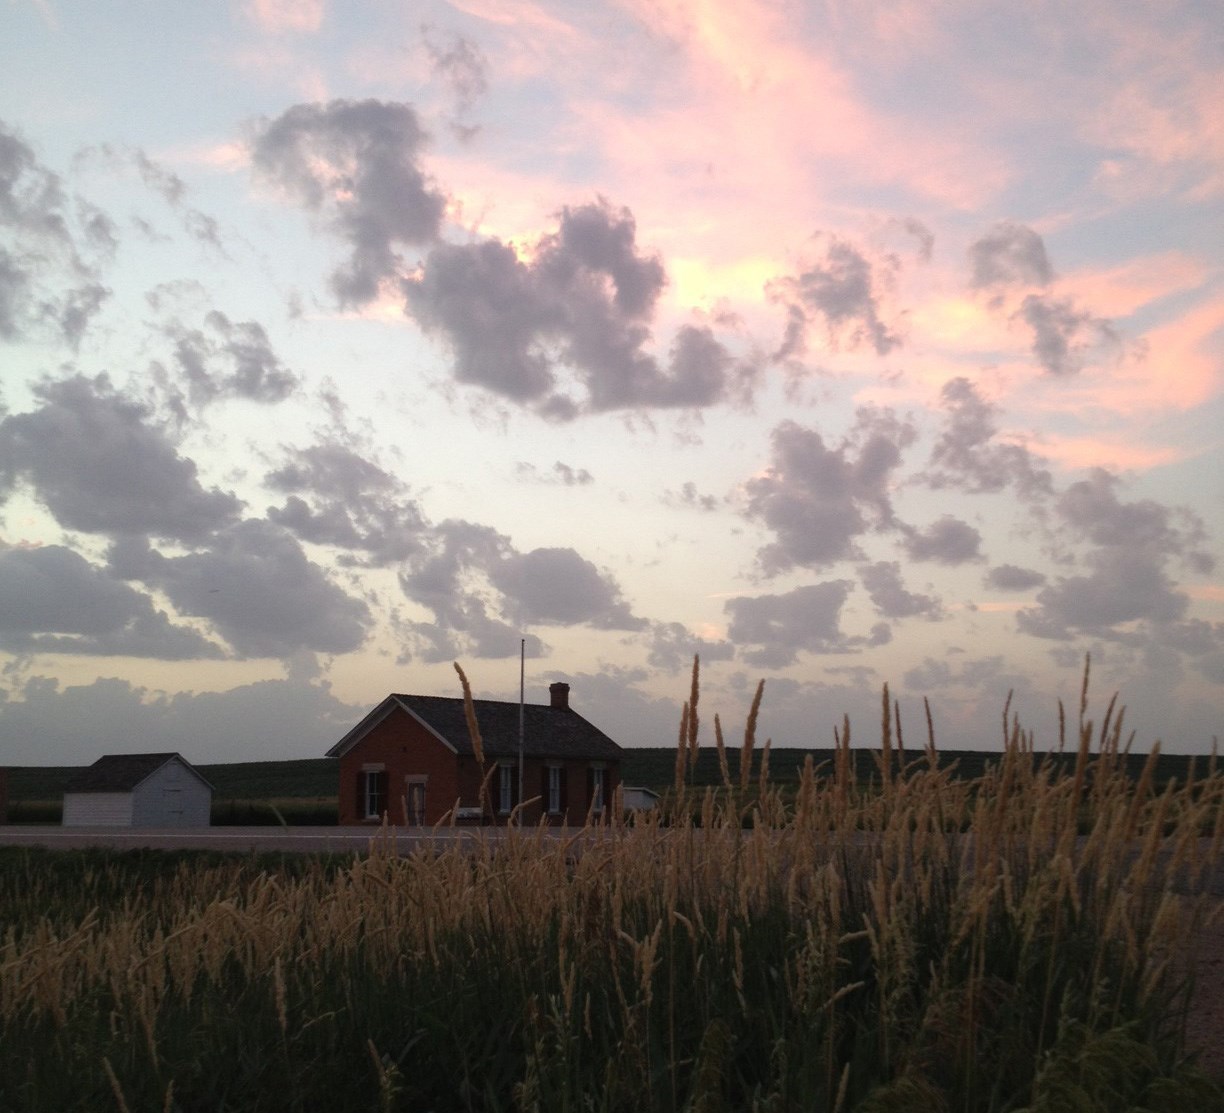 Soft pink and blue sunset glowing behind puffy clouds over the one-room Freeman School, behind tall grasses